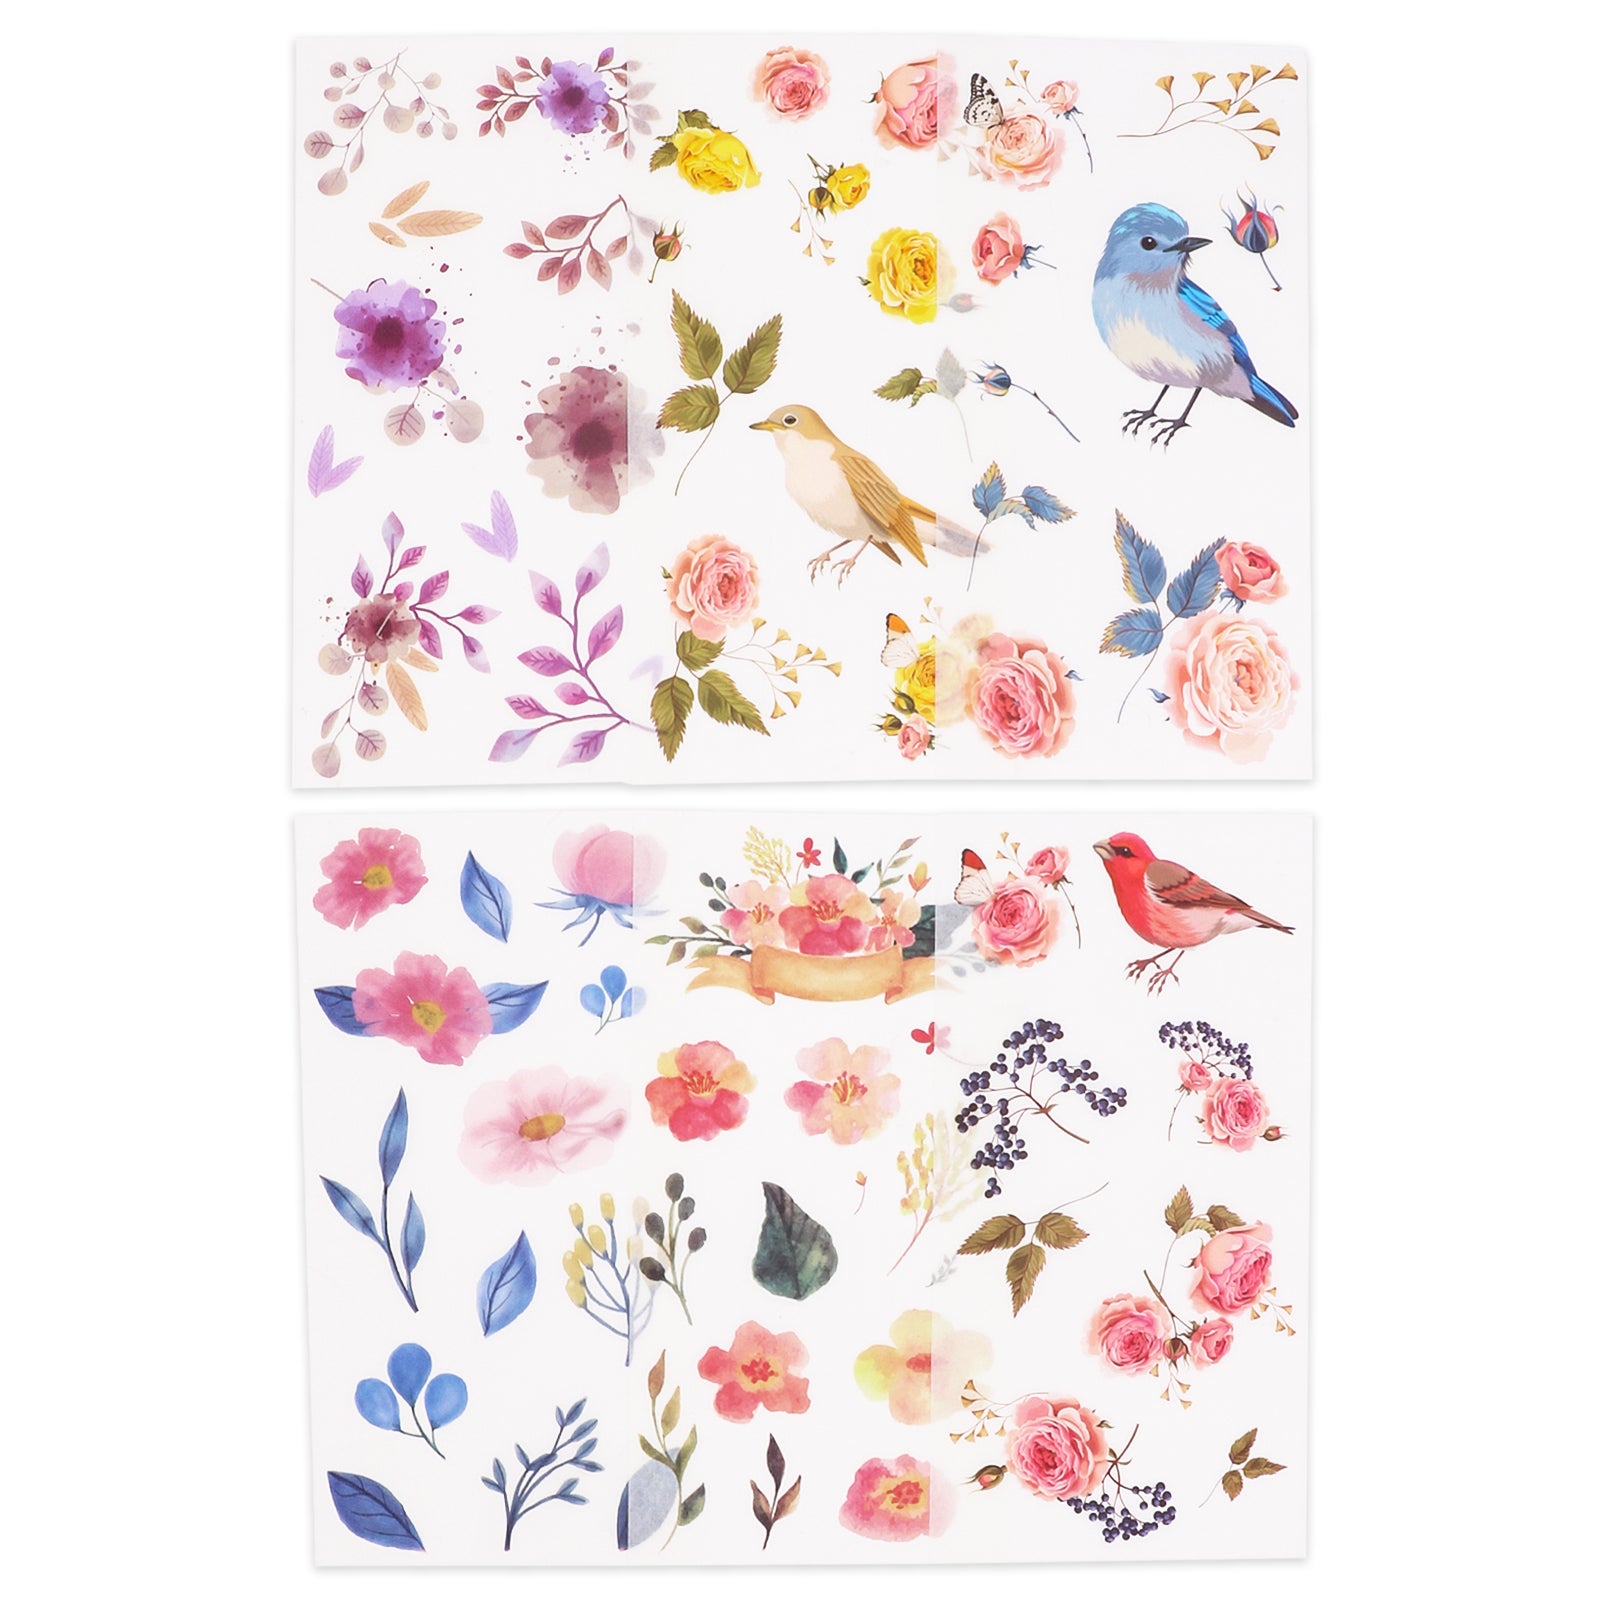 CURRENT Watercolor Birds Stickers - Set of 52 Stickers, Two 8-1/2 x 11  Sheets, Holiday Arts and Crafts, Fun for Kids, Spring Themed Gifts, Party  Bag Favors 